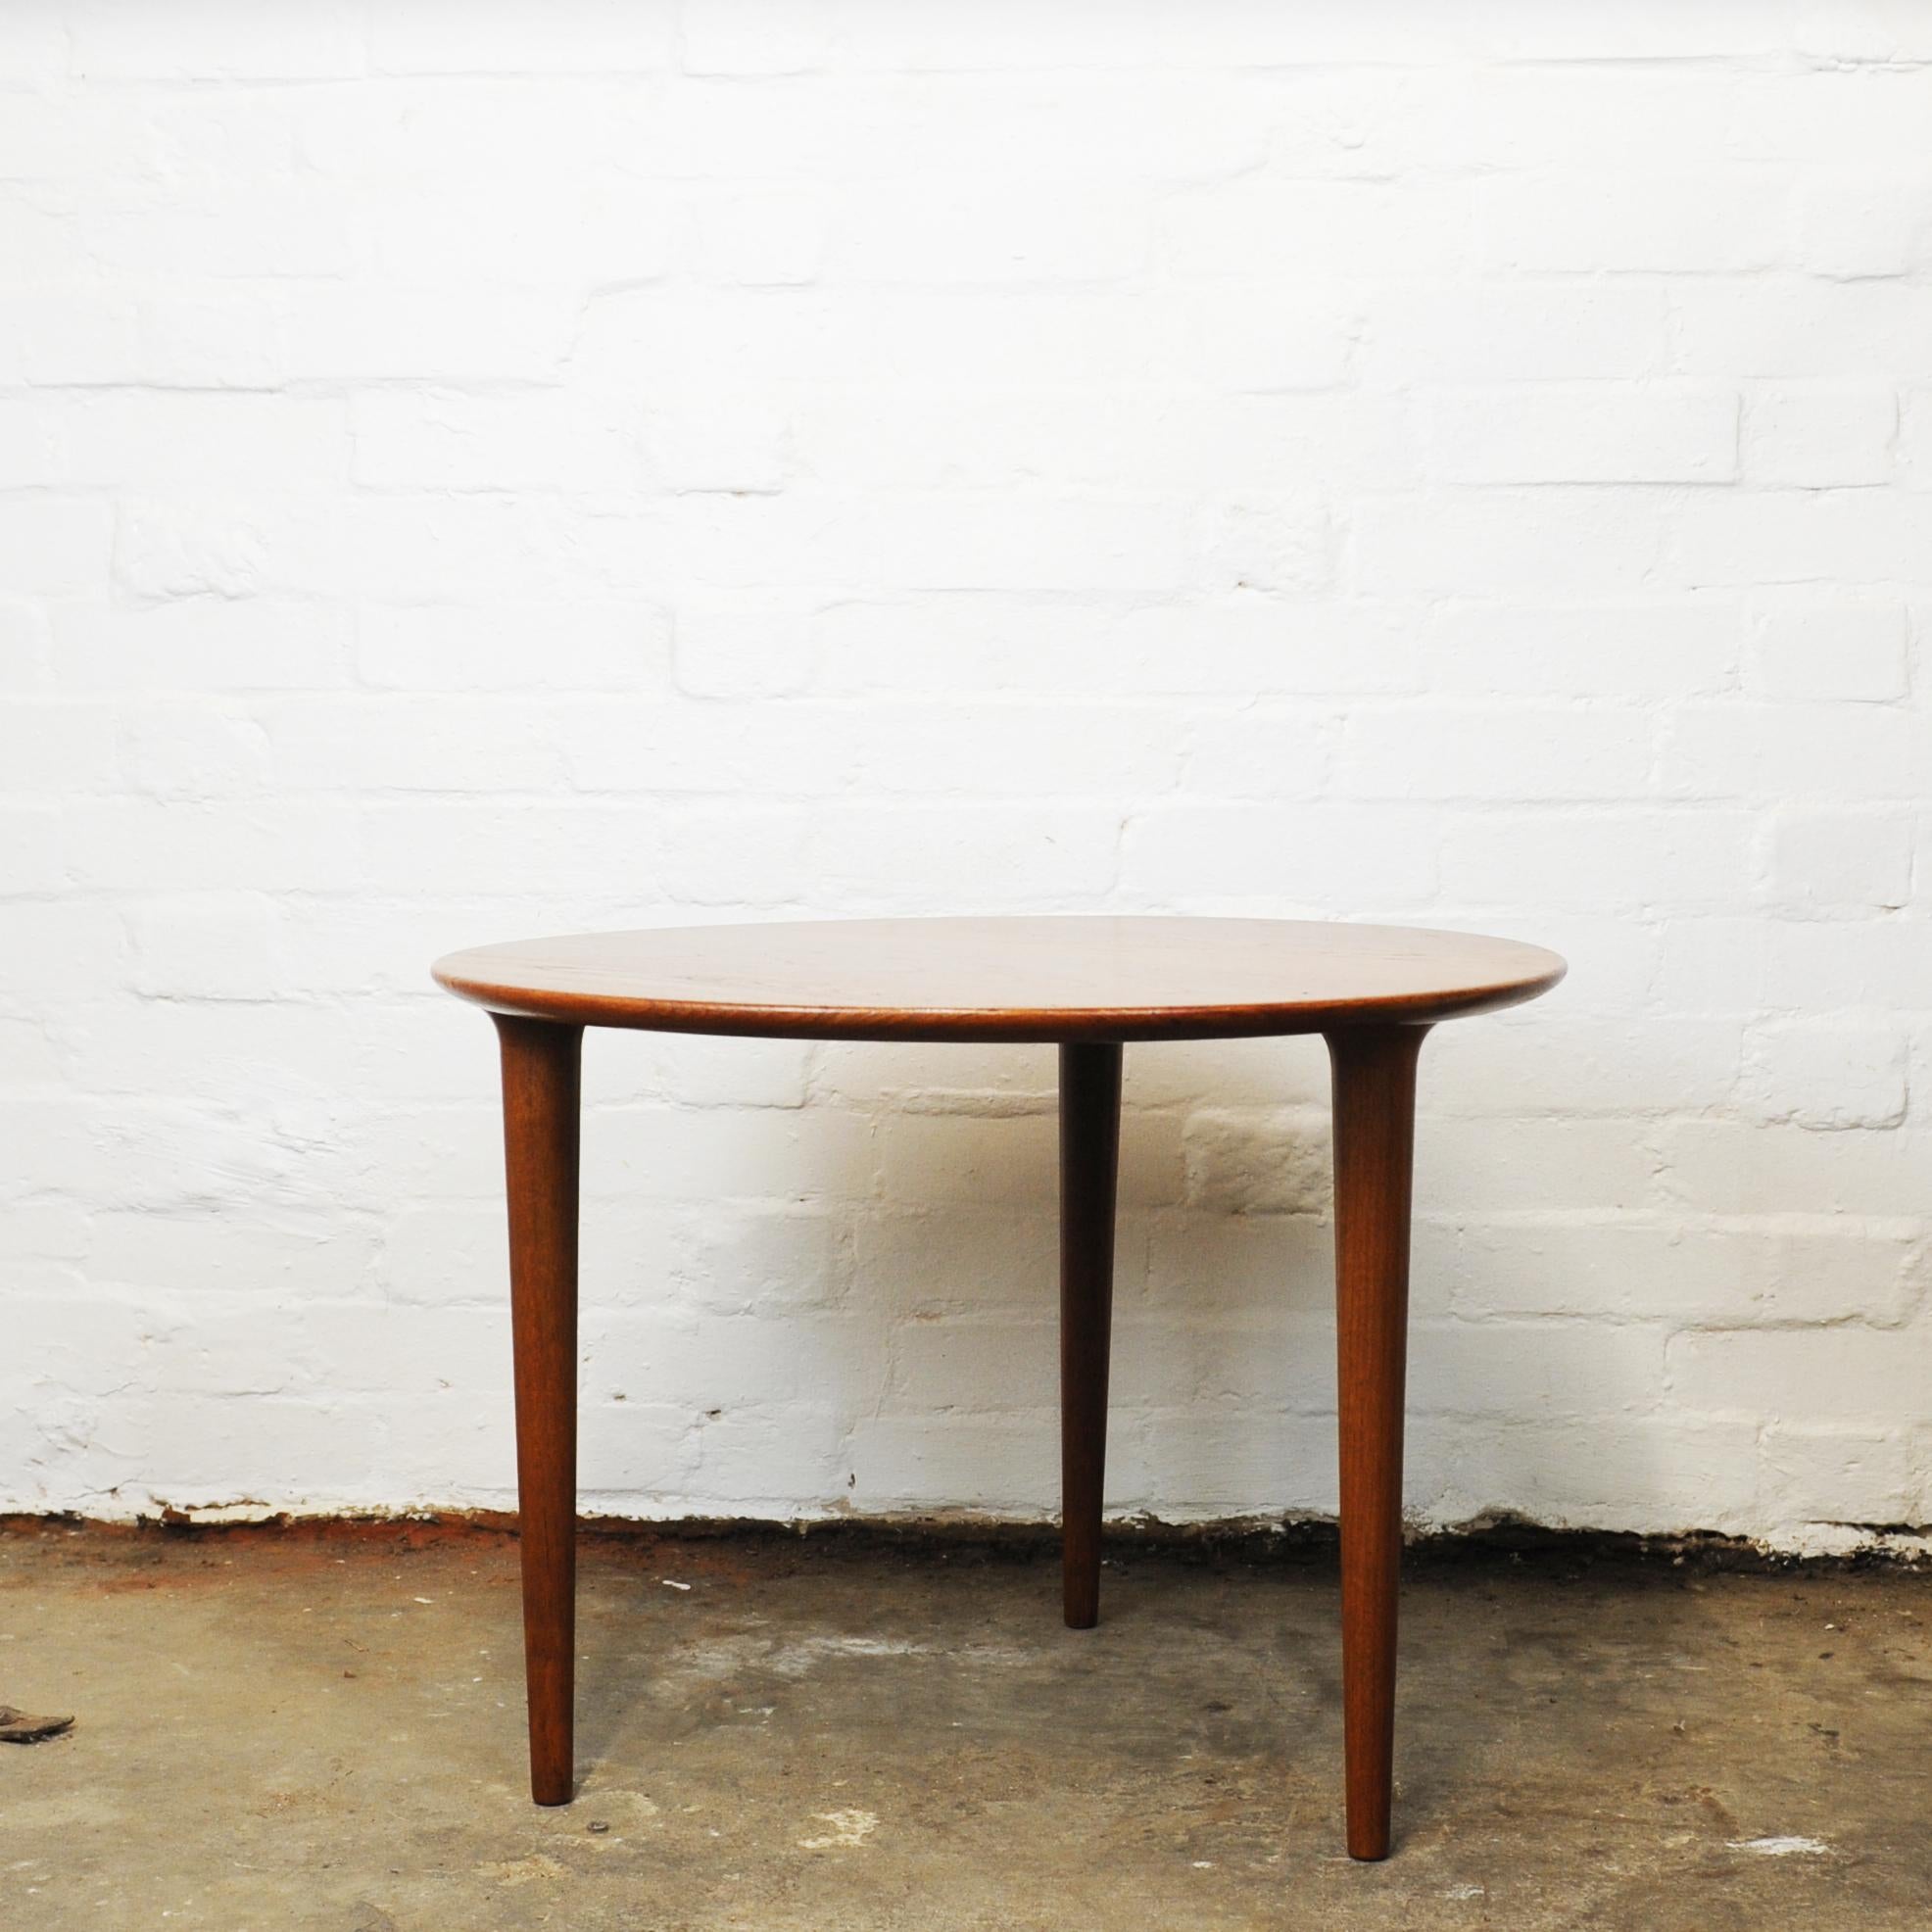 Mid-Century Modern Round Teak Three Legged Coffee Table by Norsk Design Ltd, 1960s For Sale